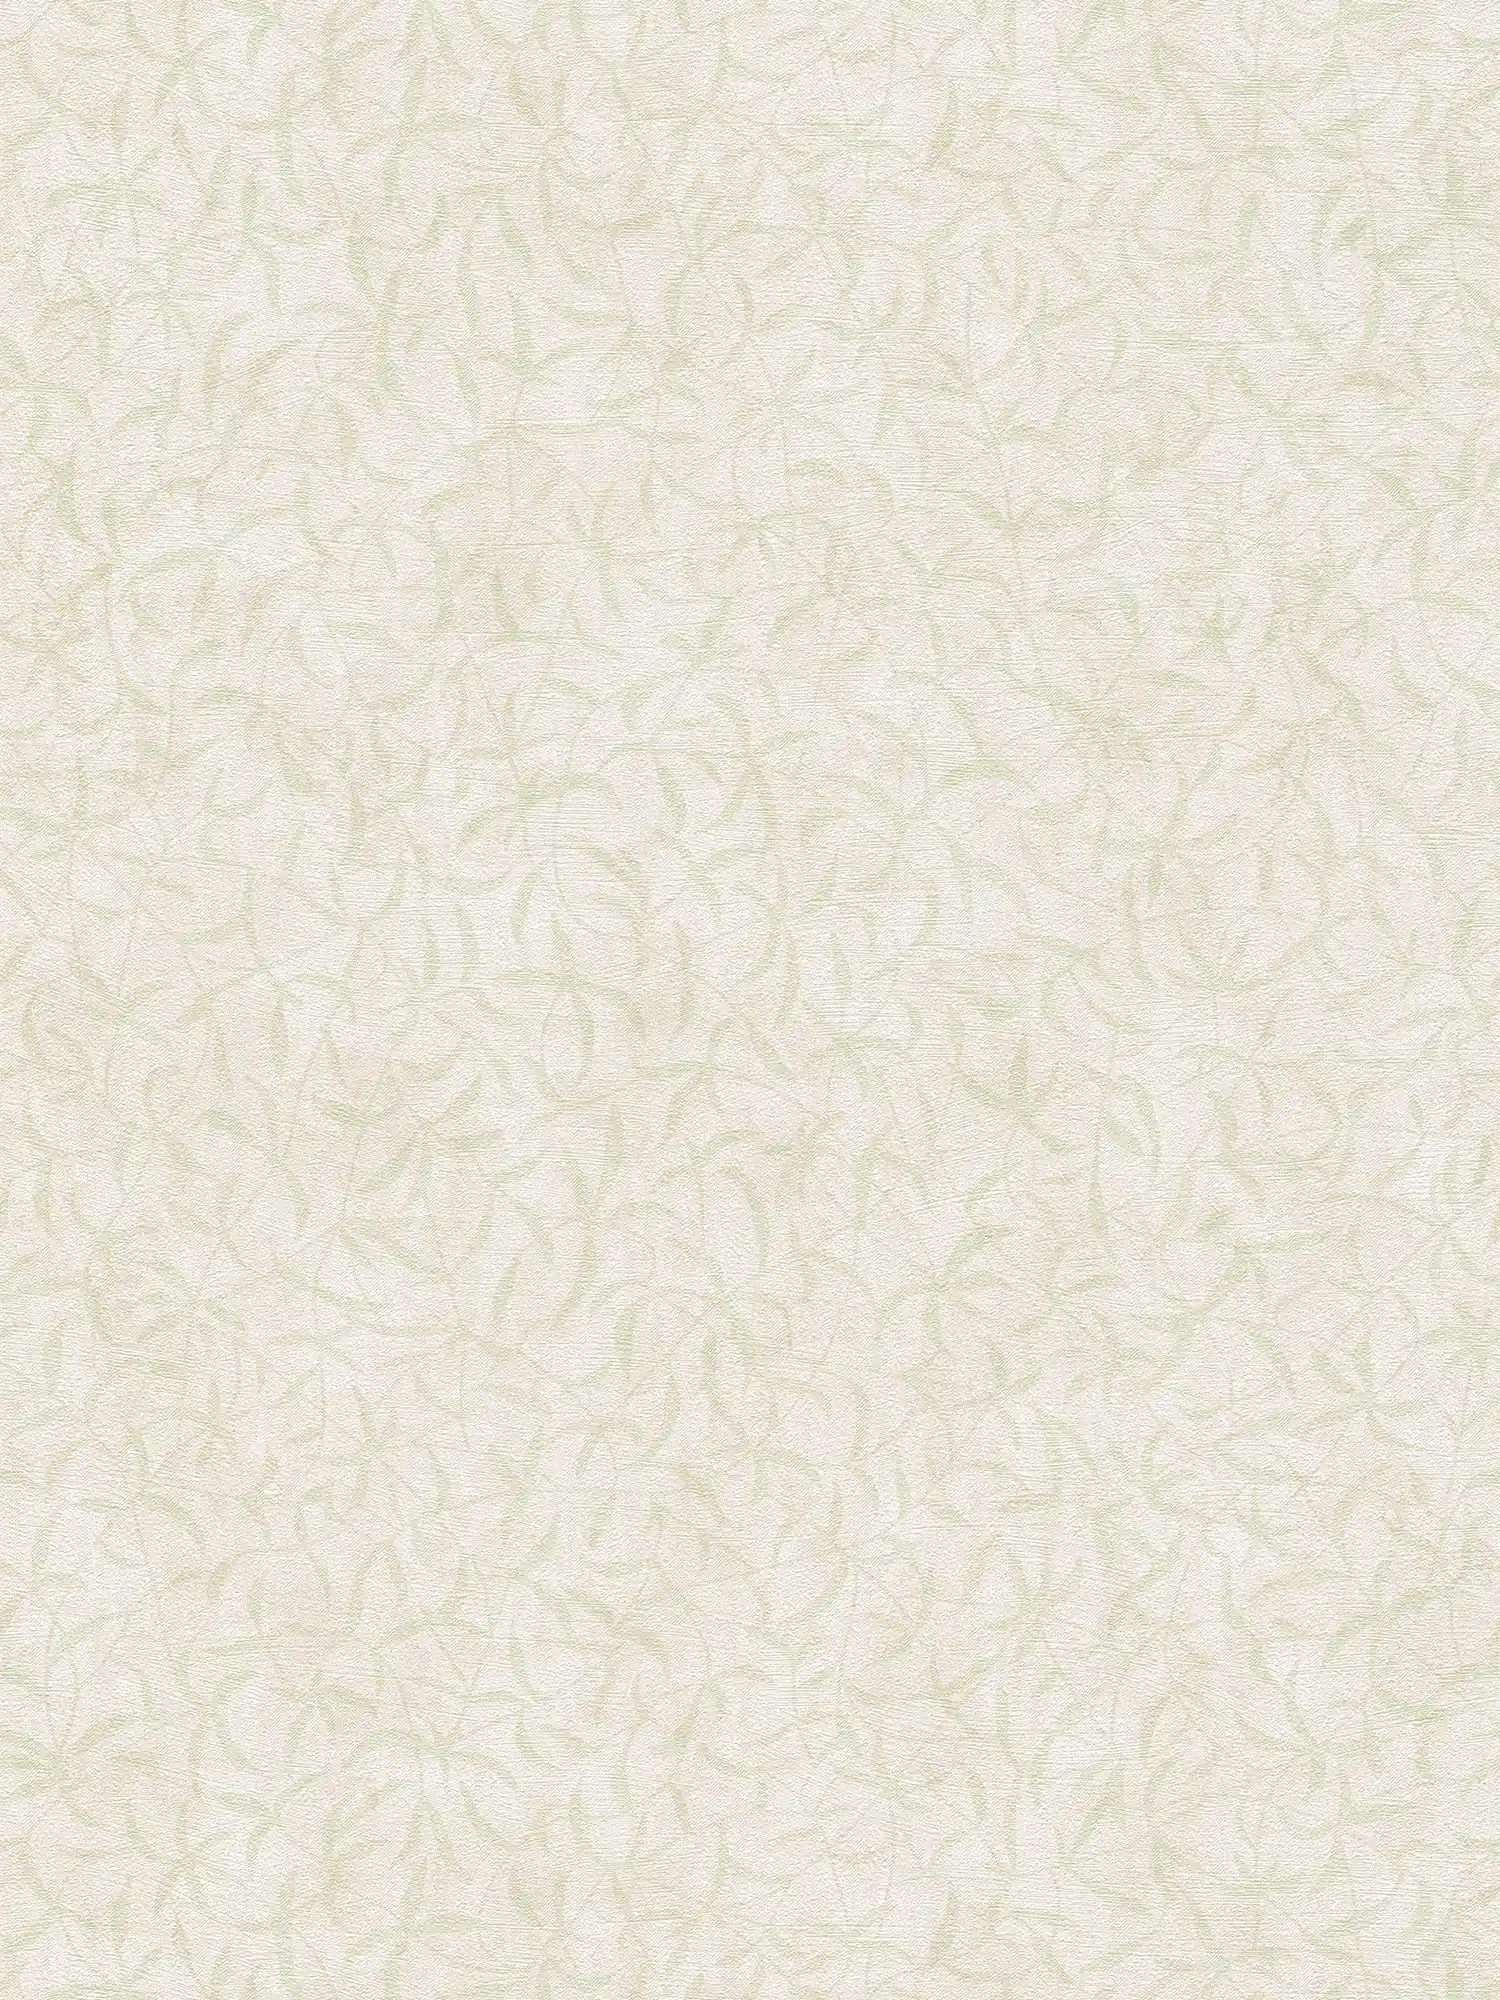 Non-woven wallpaper floral branches with structure - cream, green
